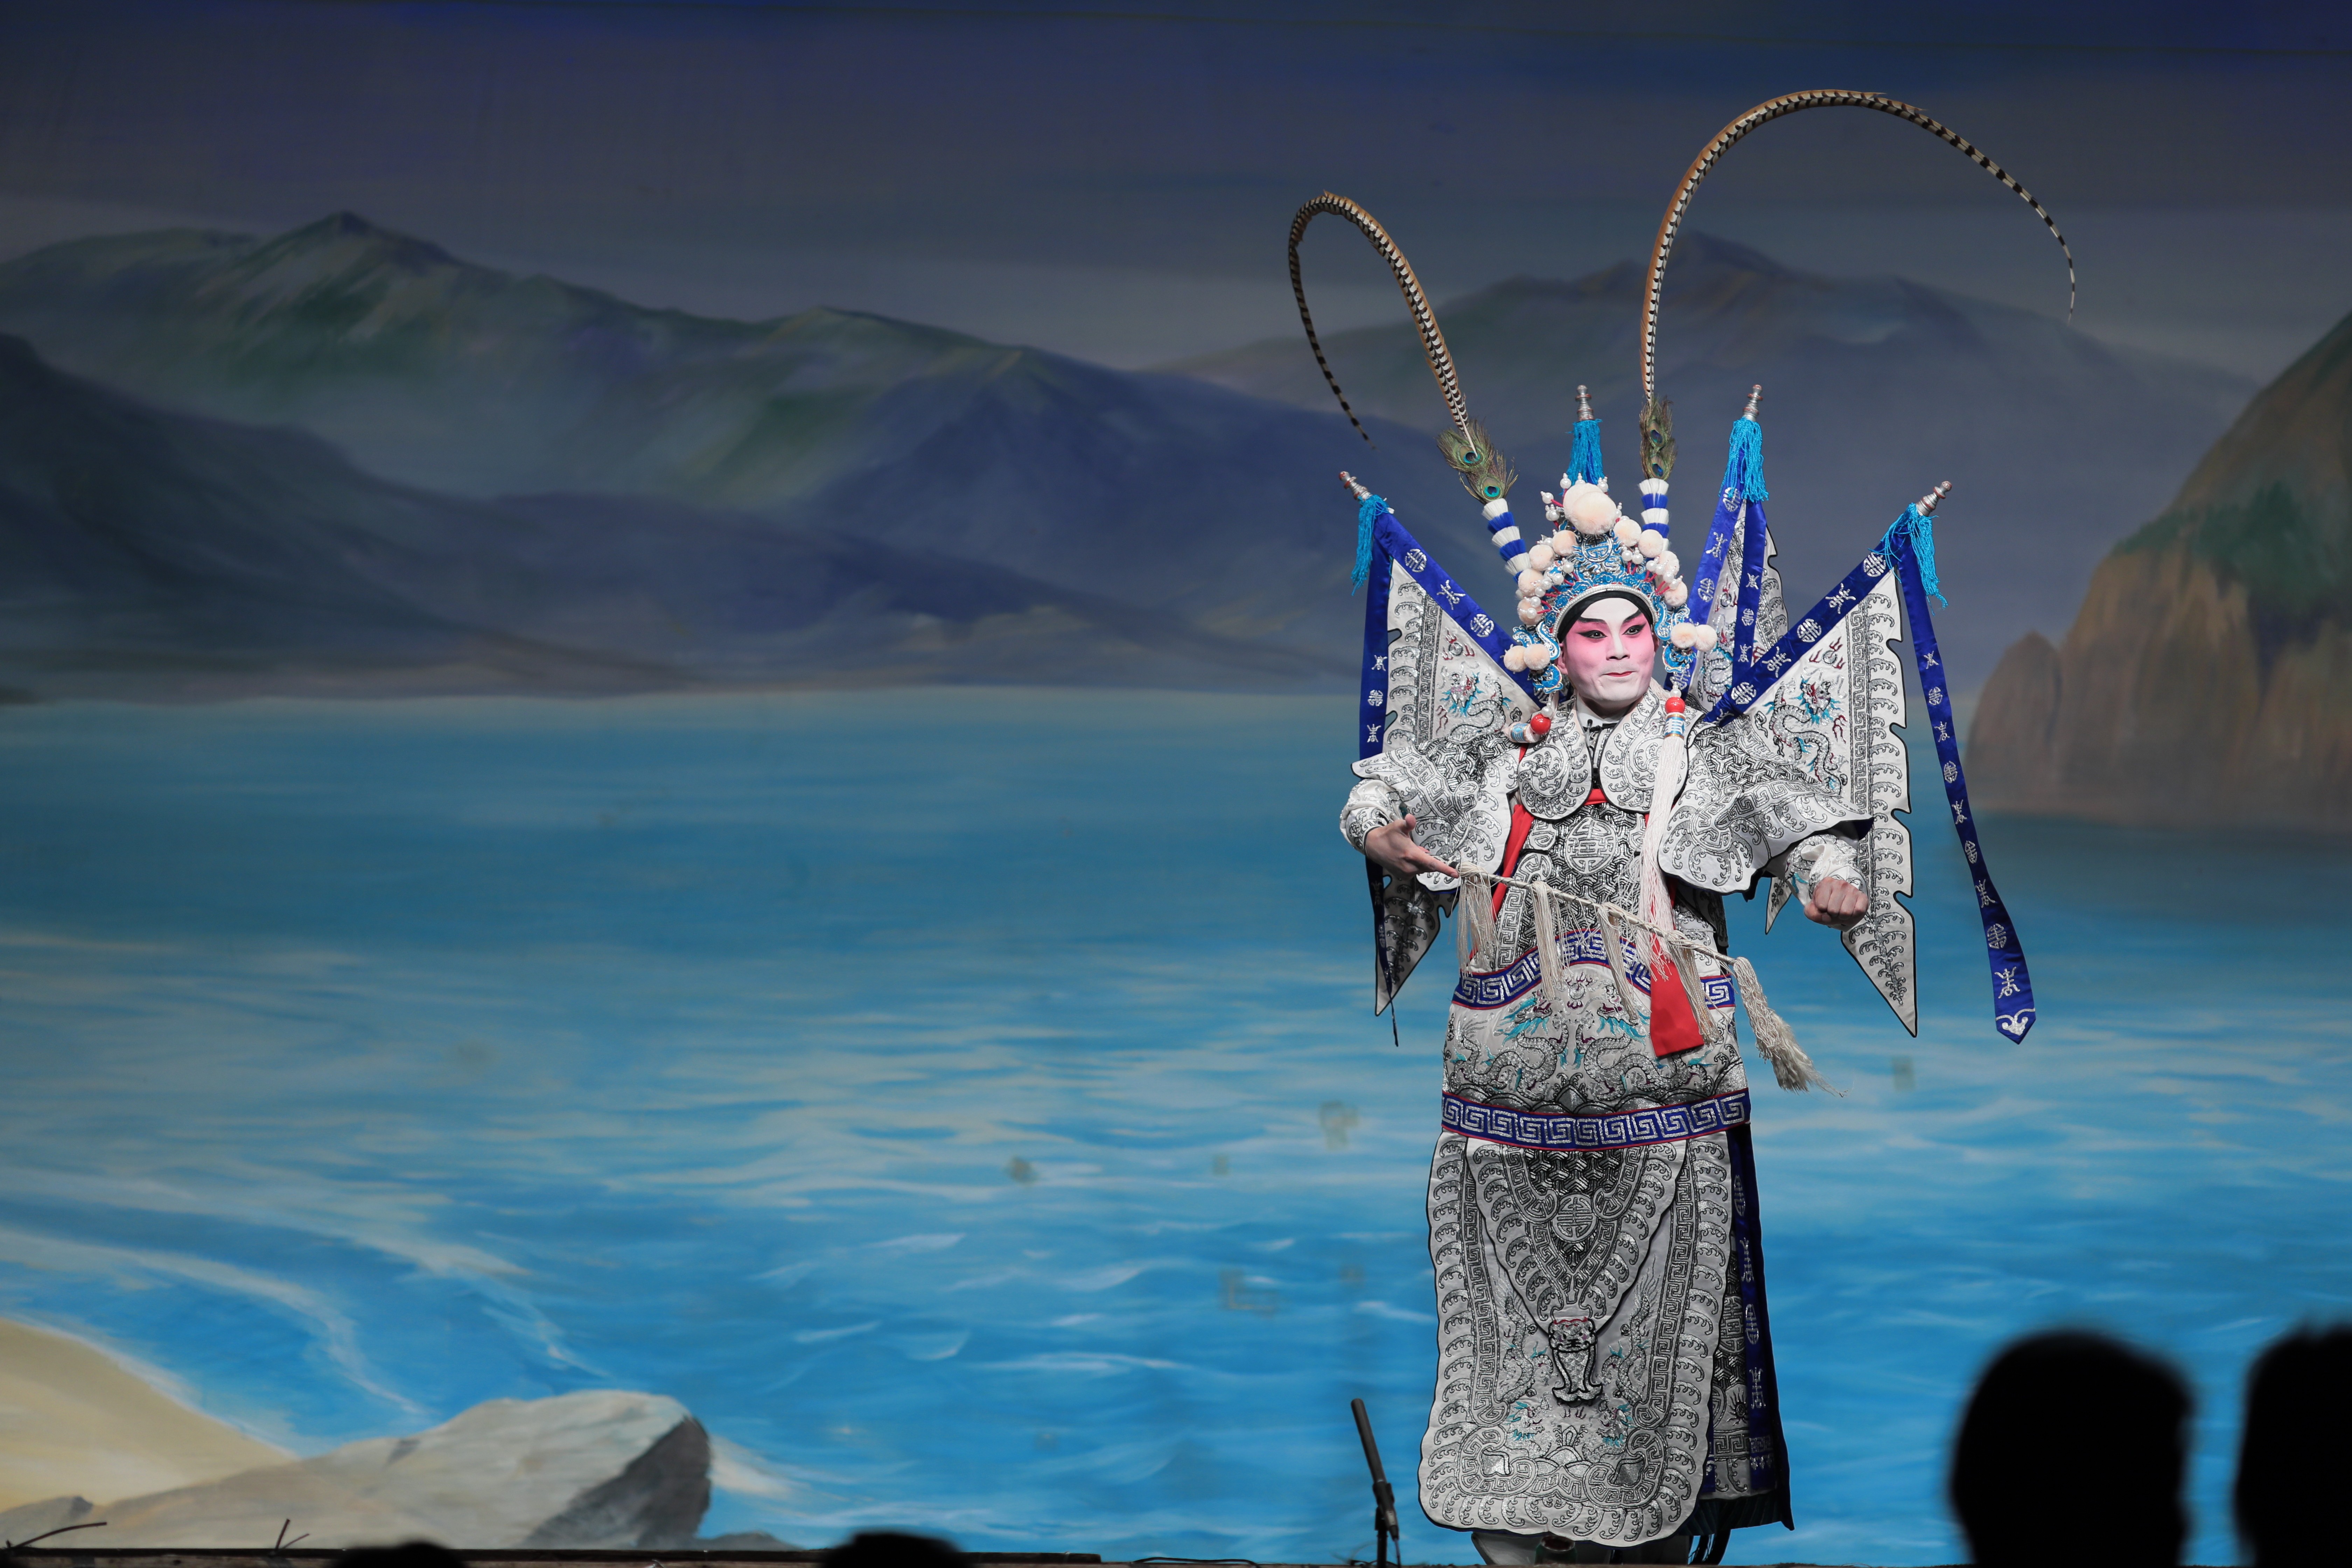 Performers of Cantonese opera, which combines singing, music, acrobatics and martial arts, often use hand and body gestures, eye expressions and footwork to reveal information about the plot.